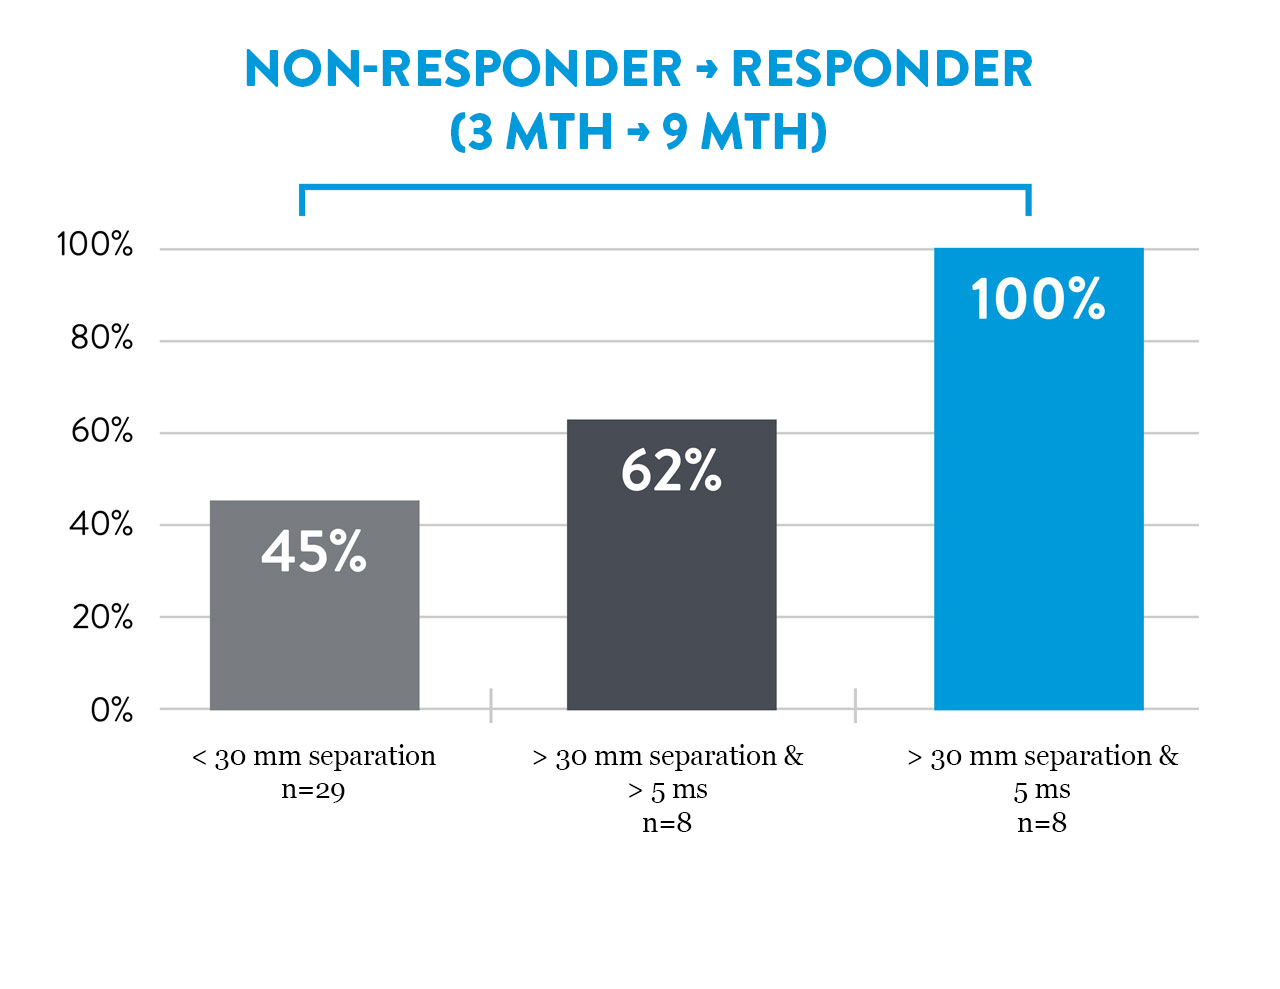 graph showing non-responder is greater than responder